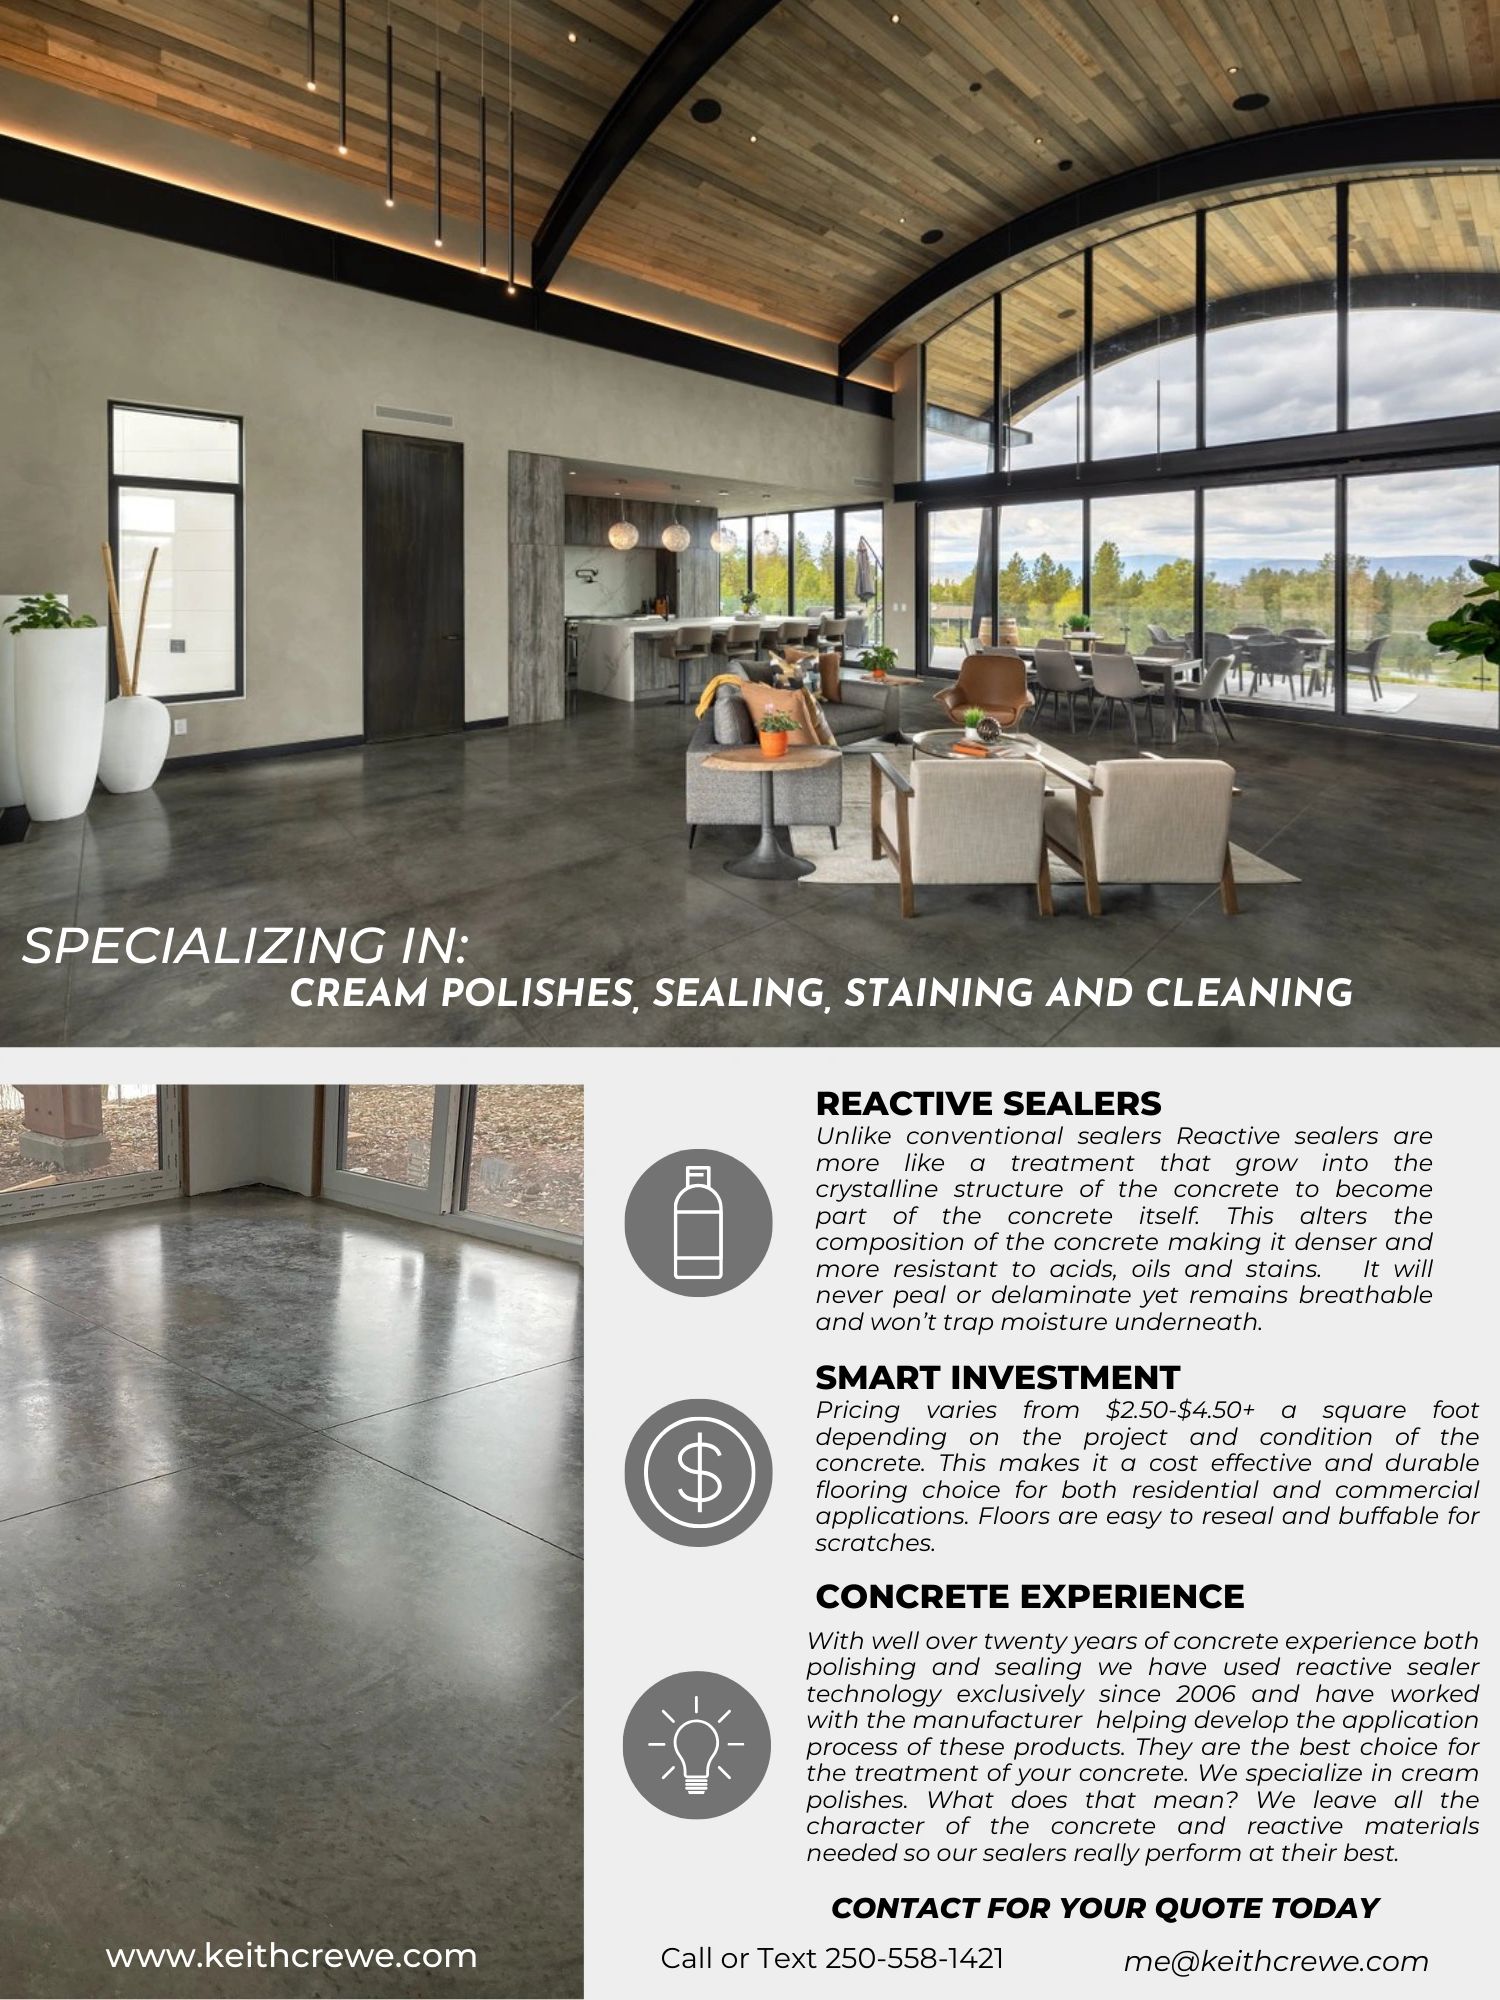 polished concrete floors, reactive sealers, staining, cleaning, Okanagan bc